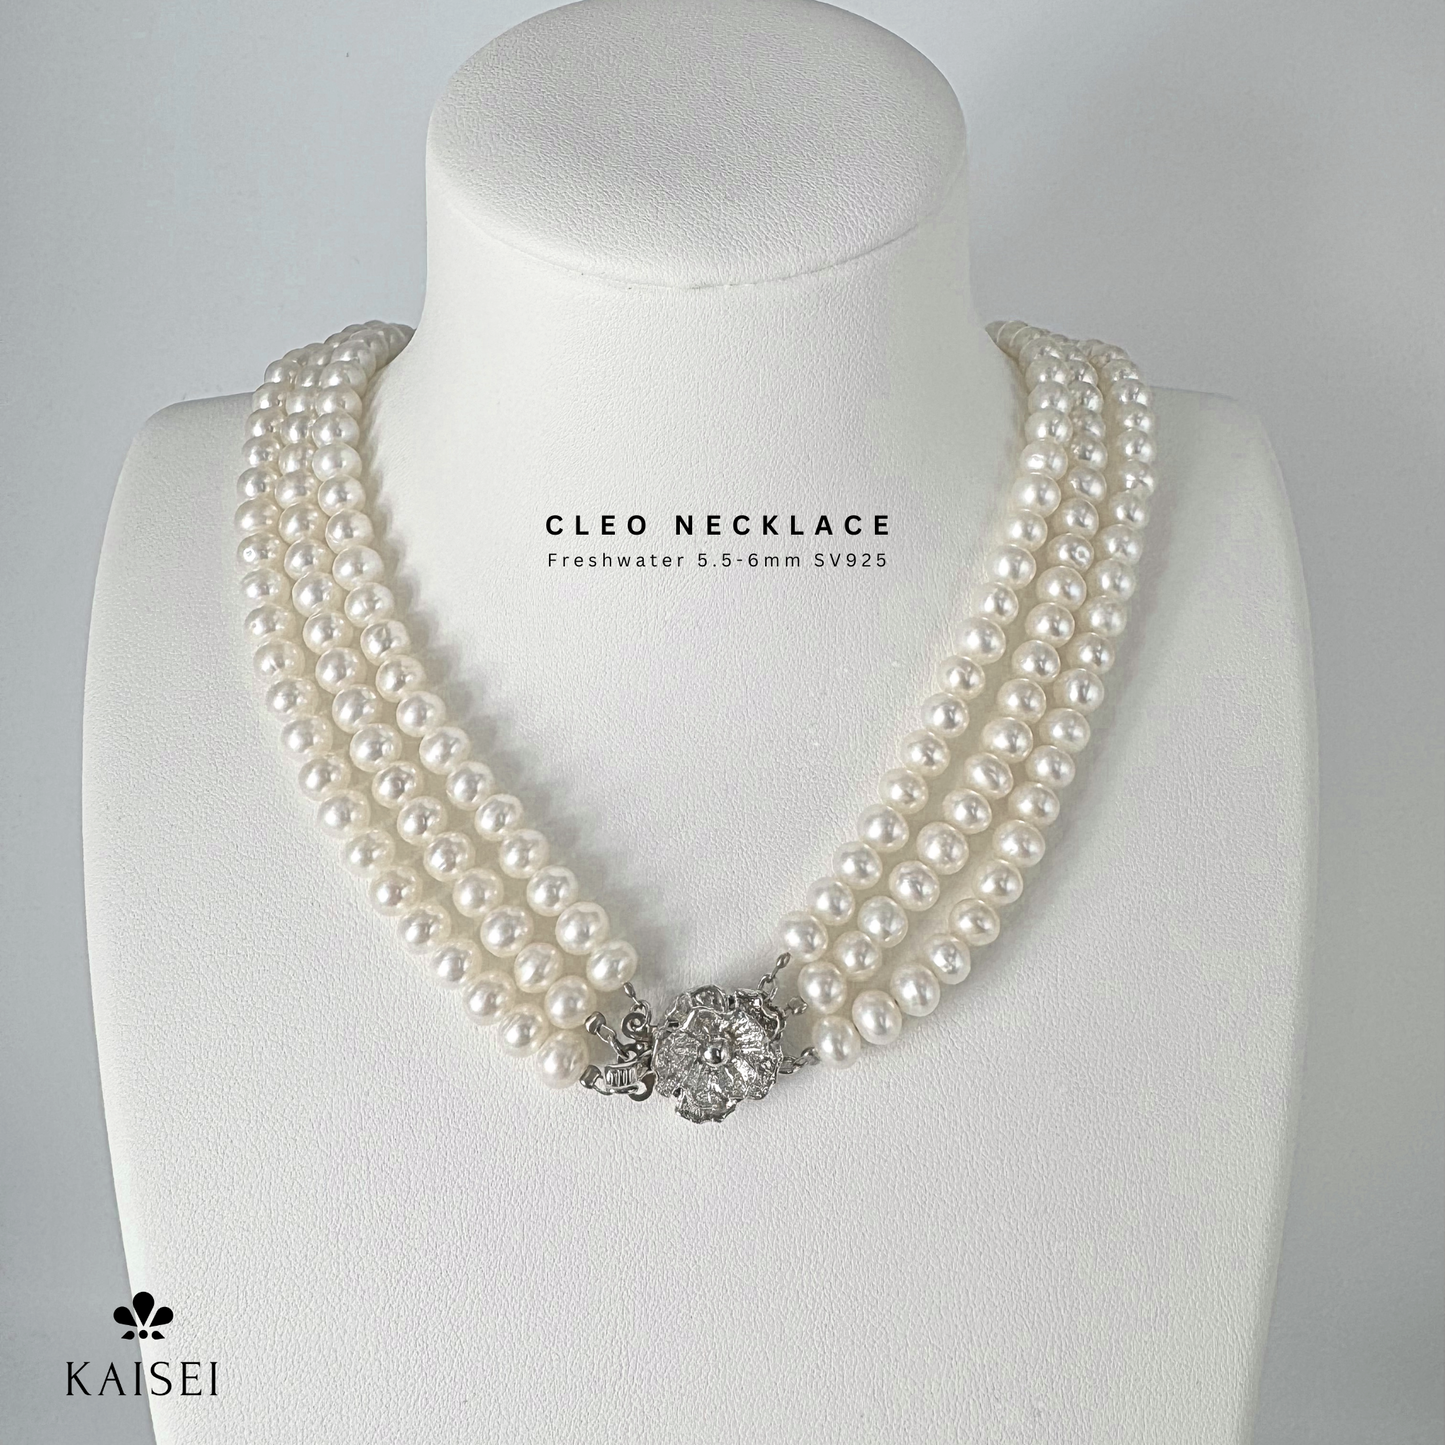 Kaisei Pearl - Cleo Necklace Freshwater Pearl 5.5-6mm 39cm SV925